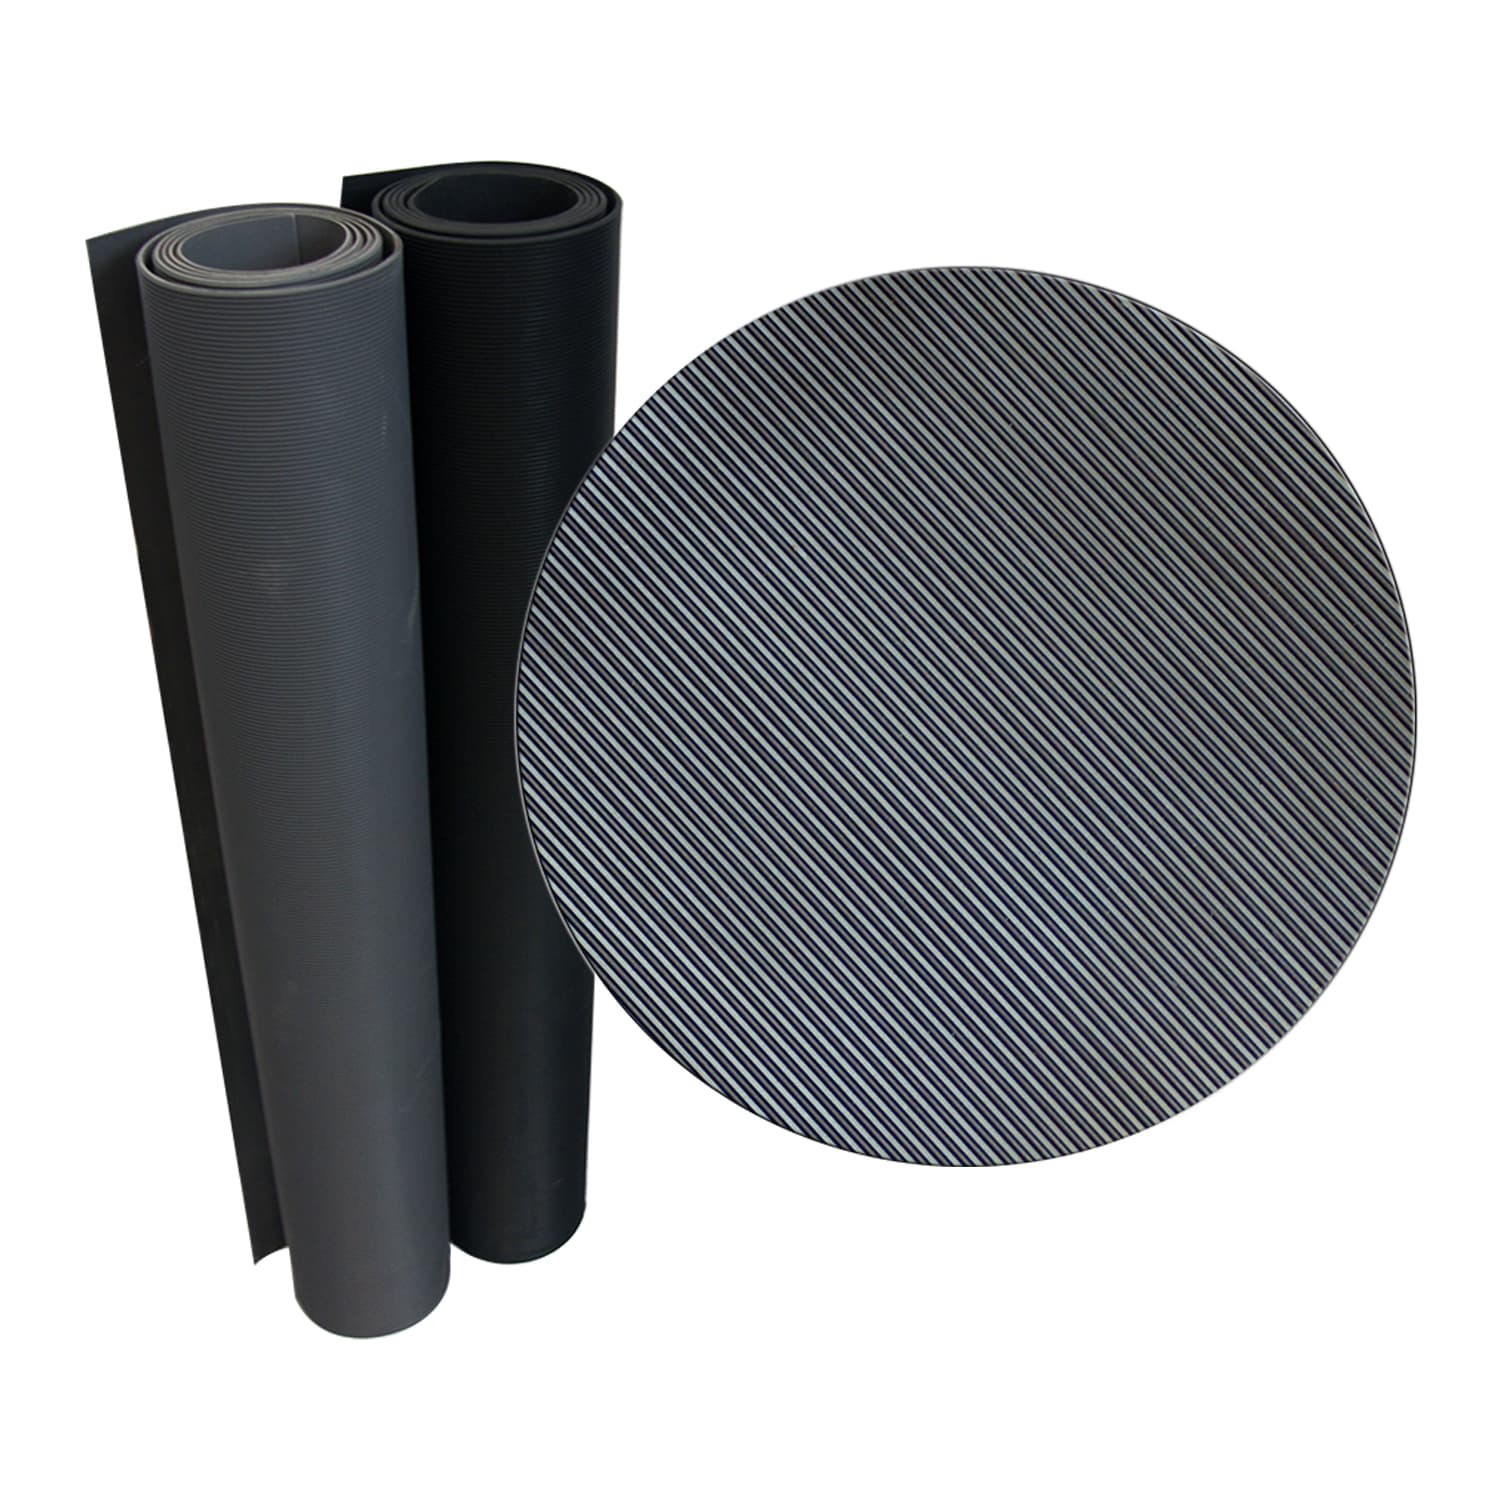 Self-adhesive Felt Pads, grey, round, many different sizes, and a thickness  of 3.5mm